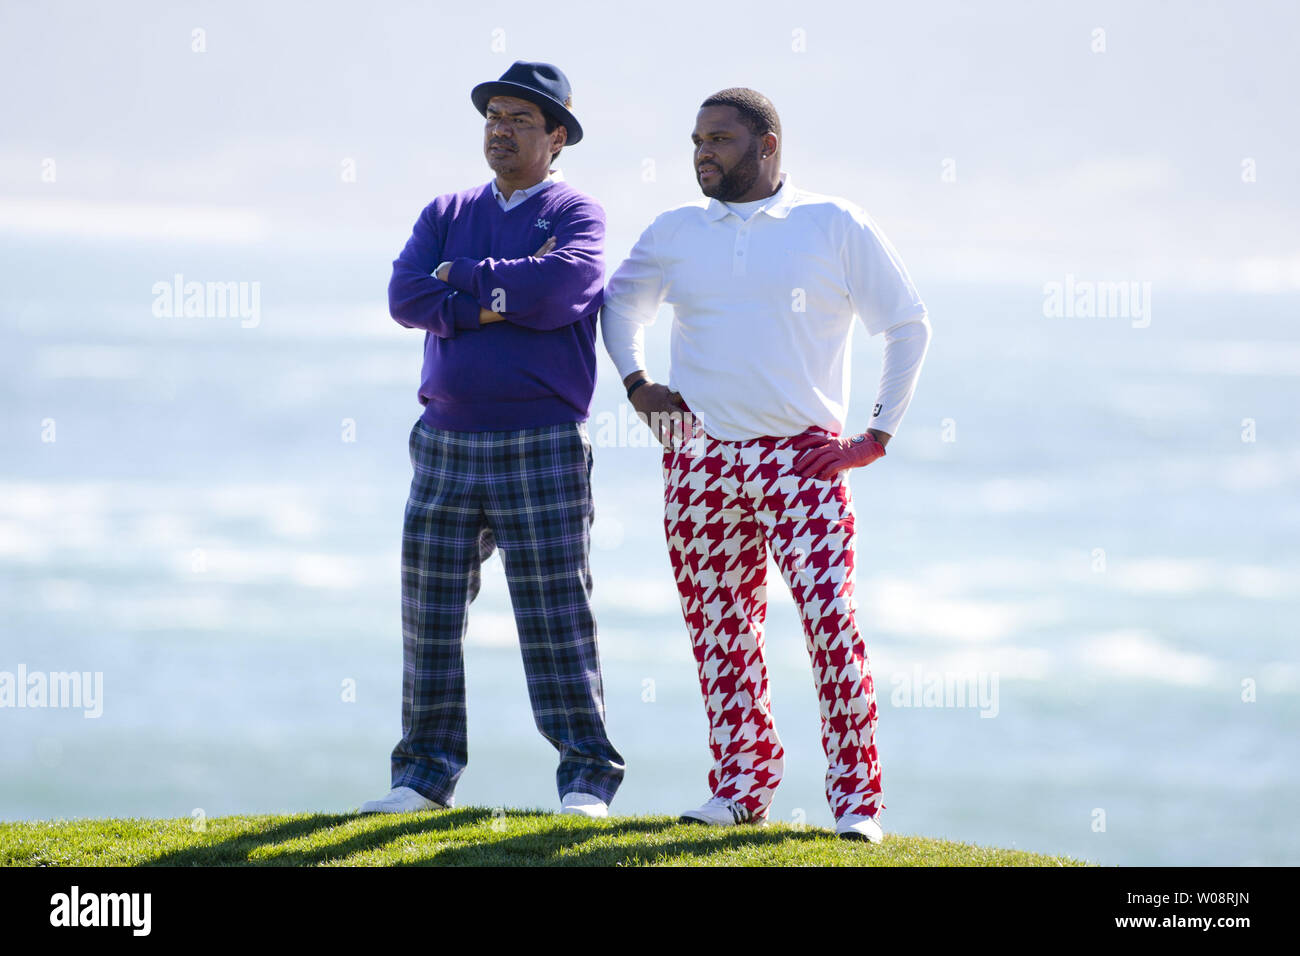 Comedian George Lopez (L) and actor Anthony Anderson stand with their backs to the Pacific Ocean watching the 3M Celebrity Challenge prior to the AT&T Pro-Am at Pebble Beach, California on February 8, 2012.   UPI/Terry Schmitt Stock Photo